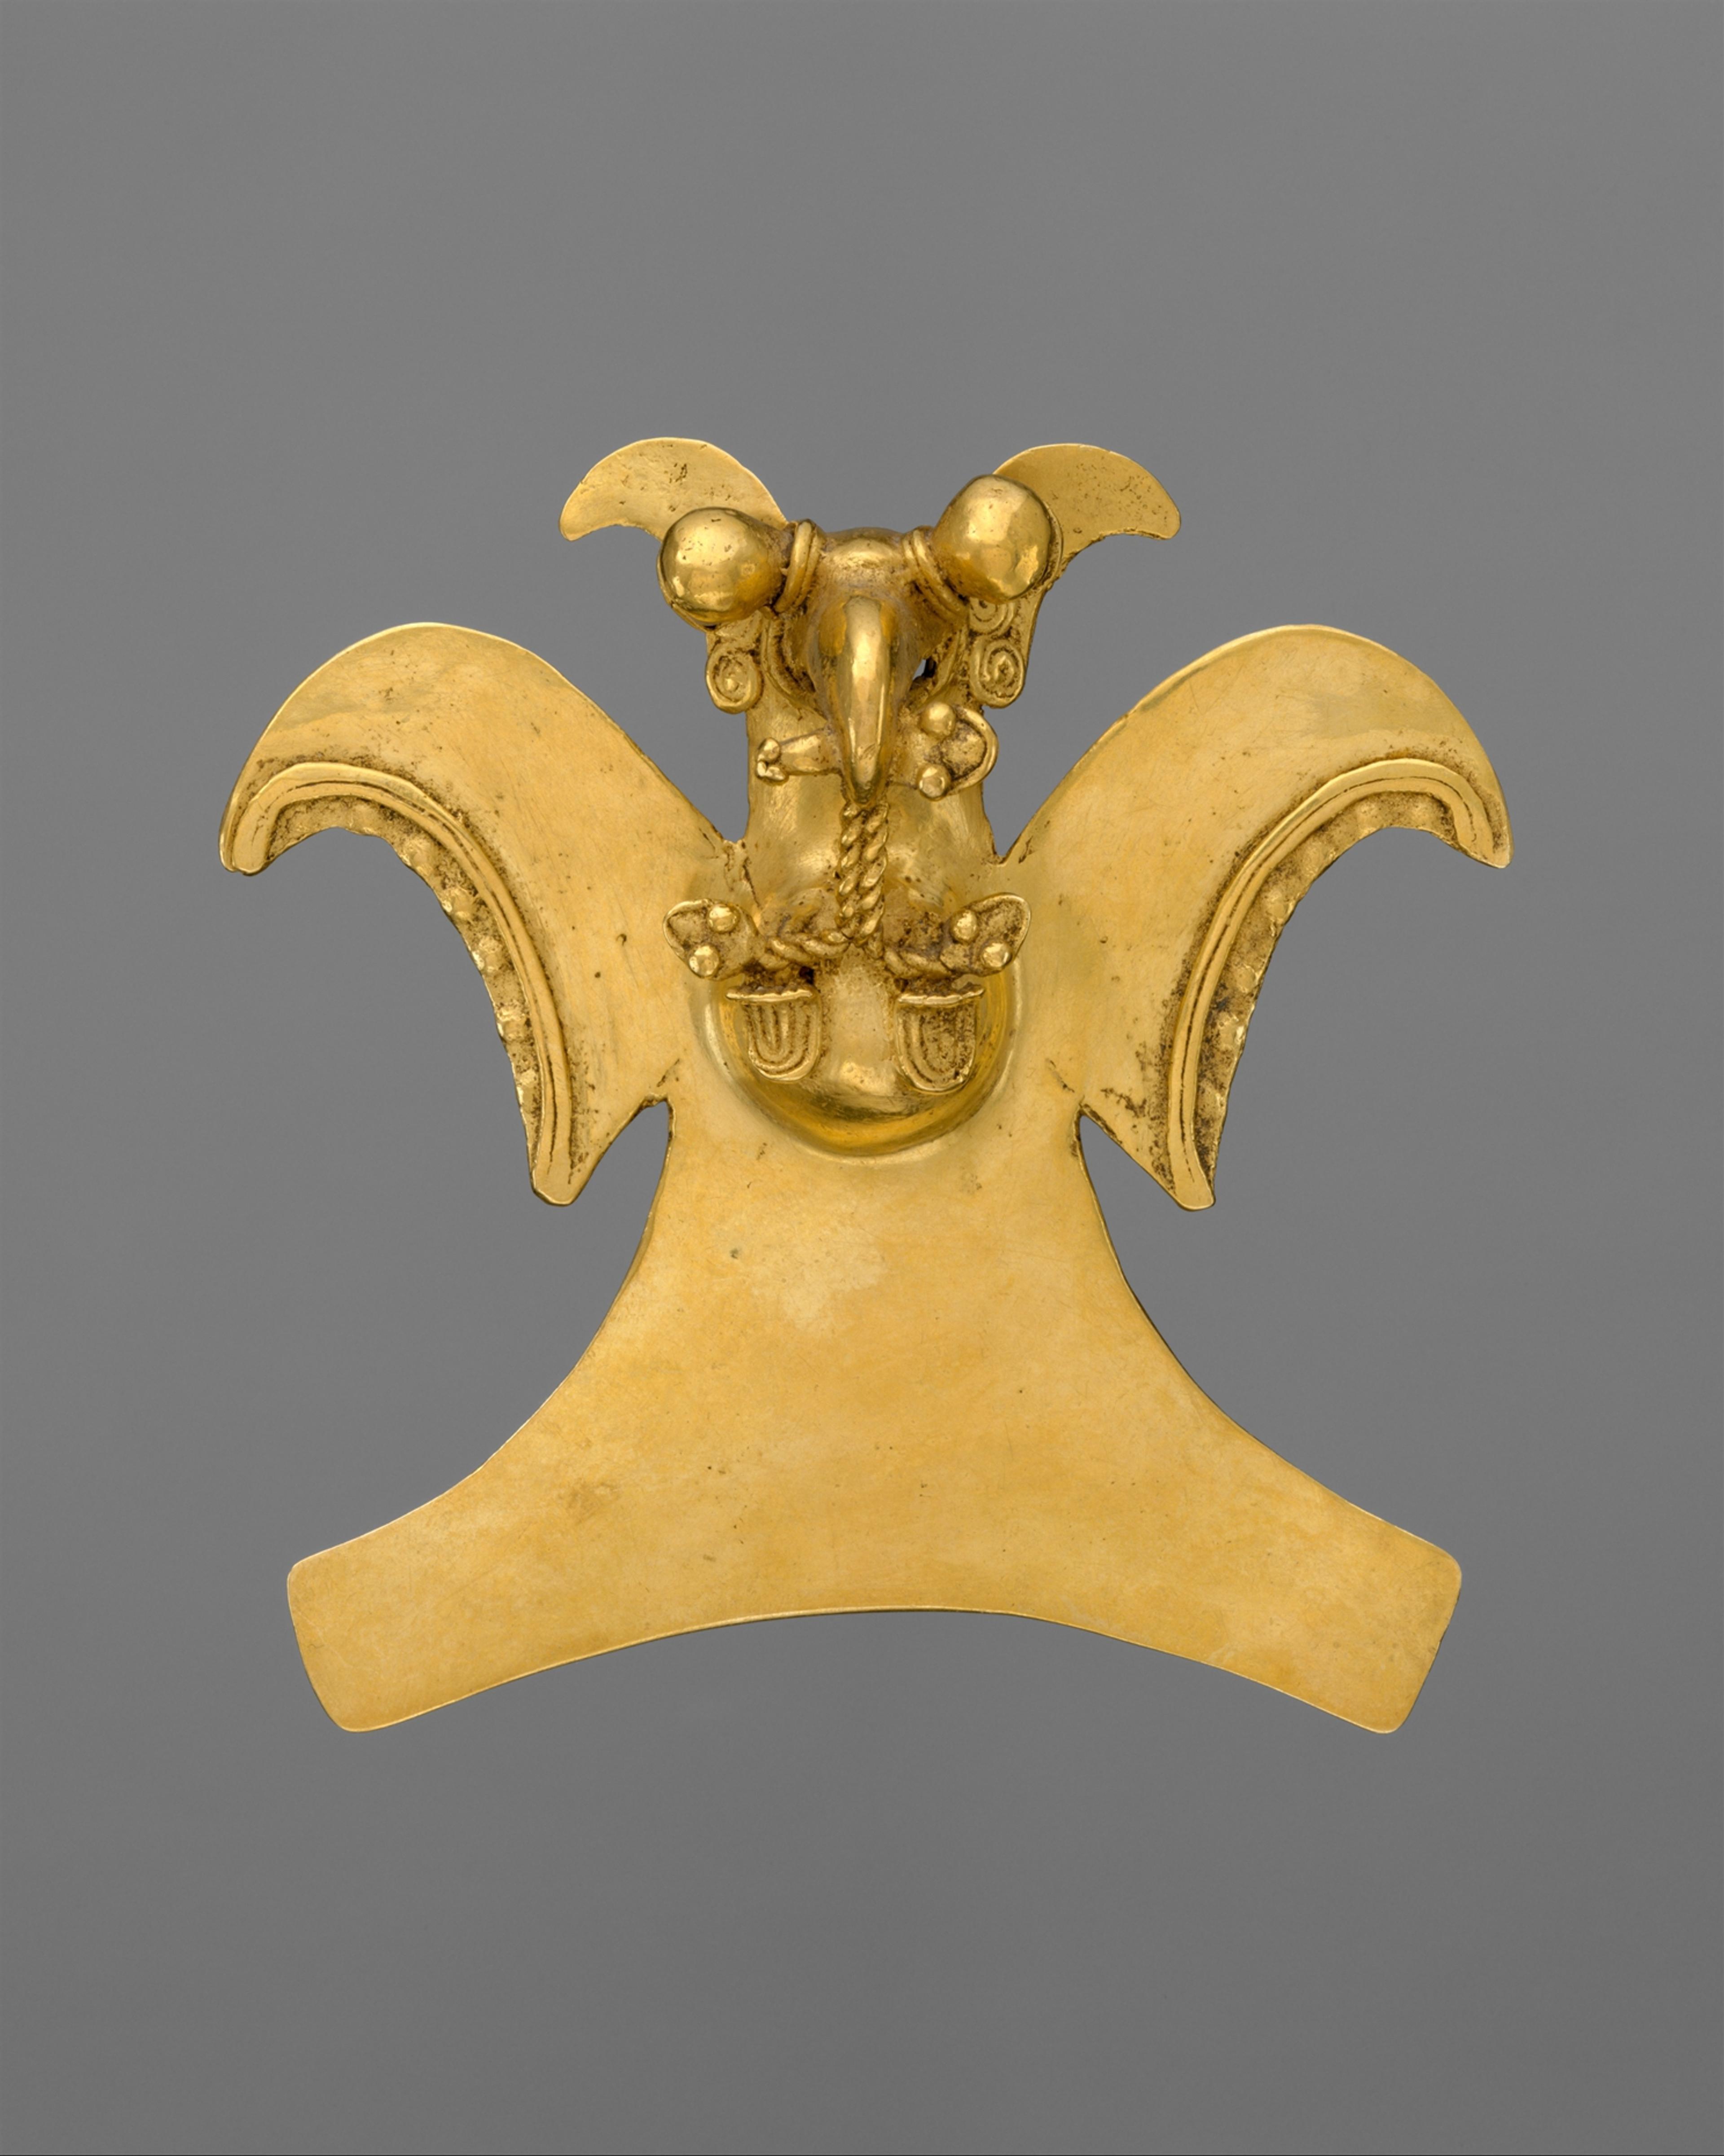 Eagle pendant, Chiriquí, 800-1519 A.D. Bird pendants like this one were first noted by Christopher Columbus, who dubed them aguilas (after the Roman version he was familiar with). Metropolitan Museum of Art.